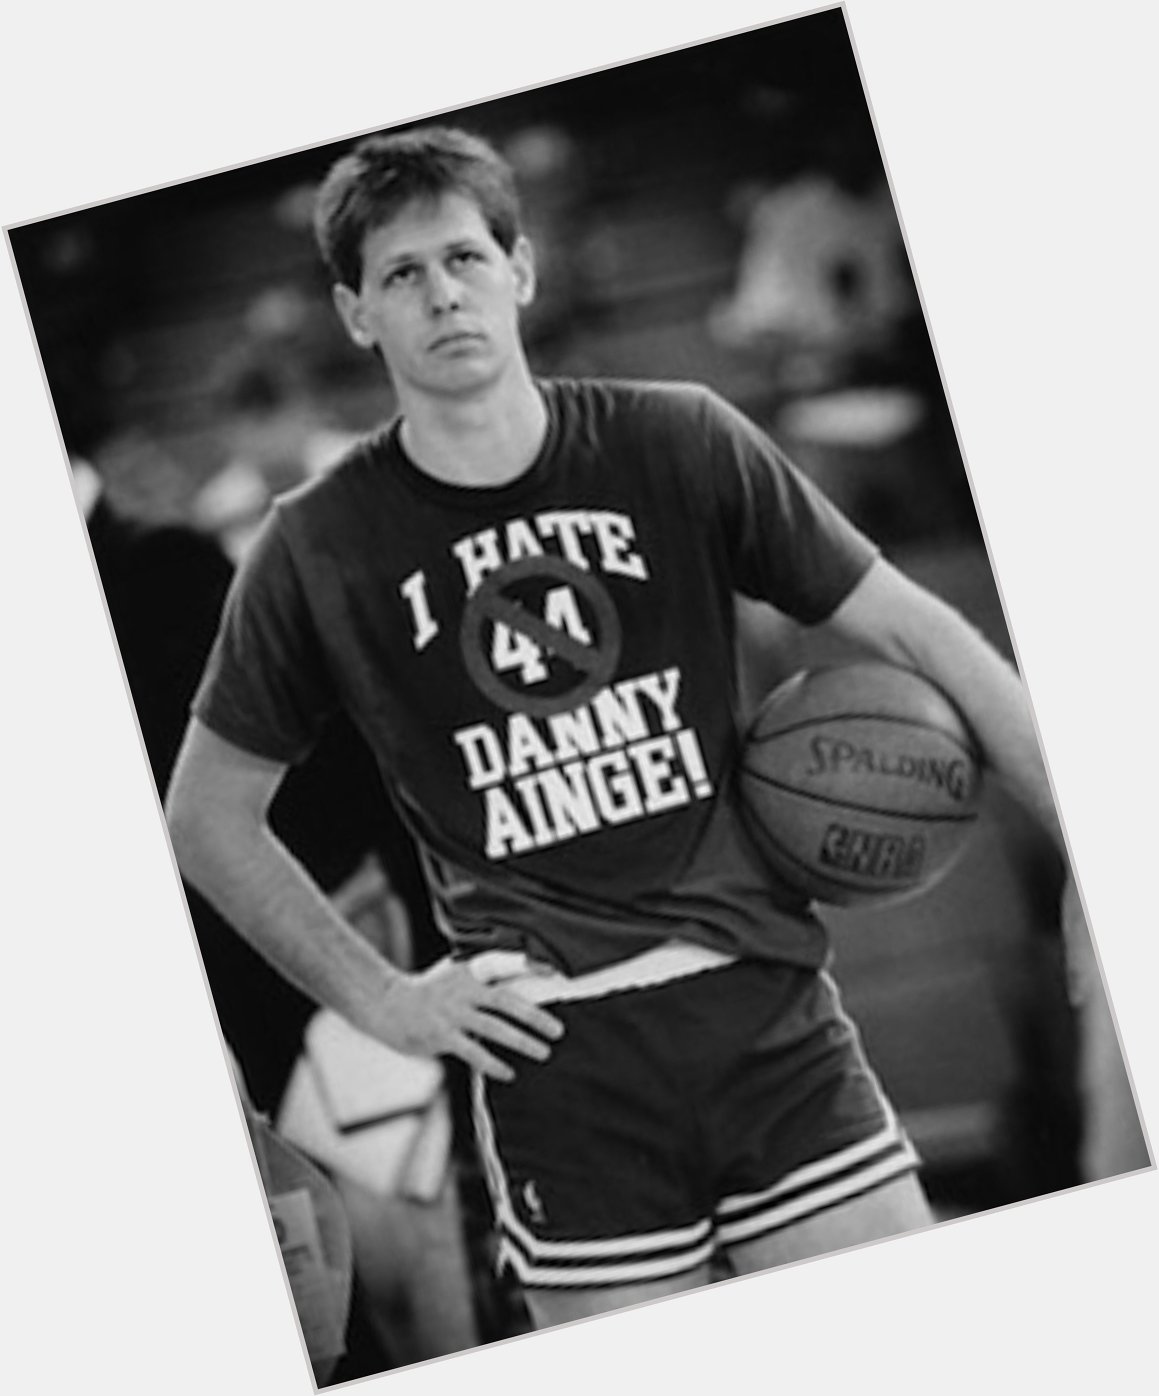 Happy birthday to Danny Ainge! Never forget when he wore an \"I Hate Danny Ainge\" shirt. Classic. 